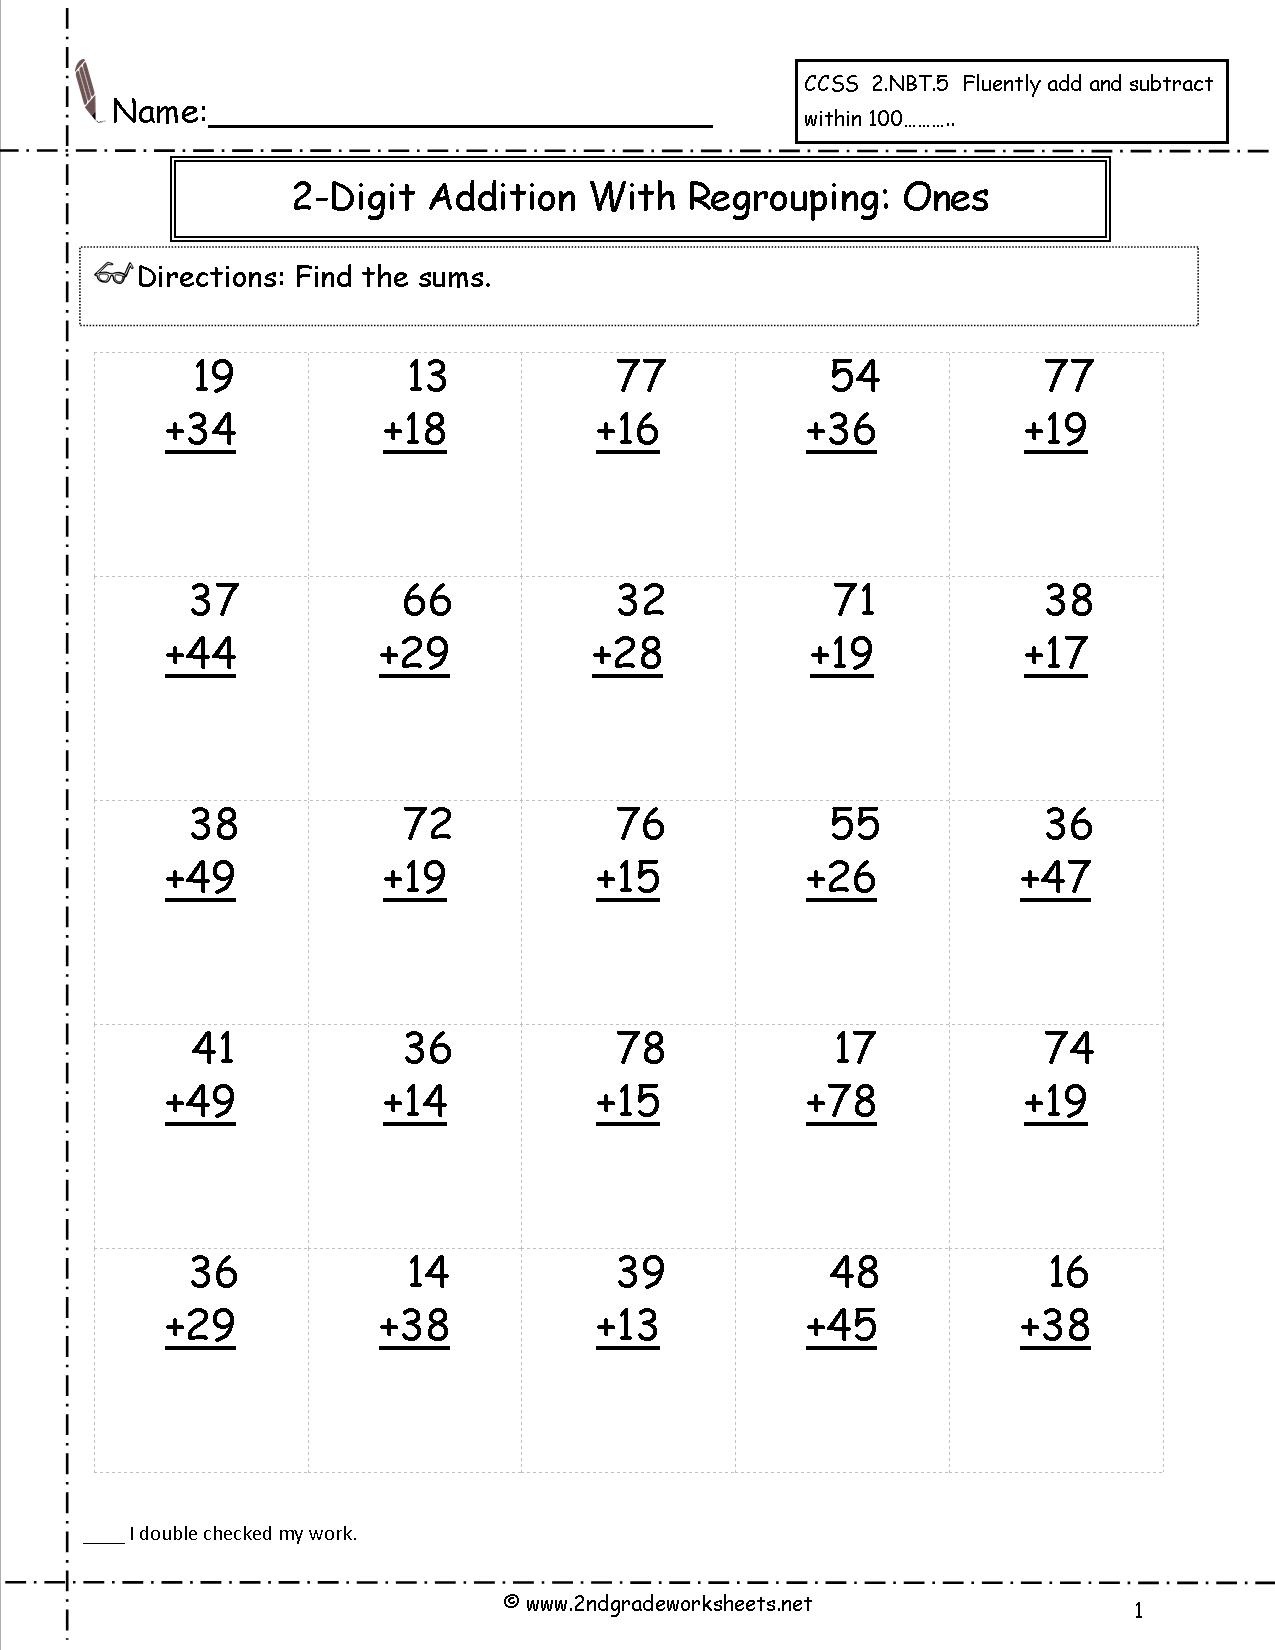 Free Math Worksheets And Printouts - Free Printable Double Digit Addition And Subtraction Worksheets